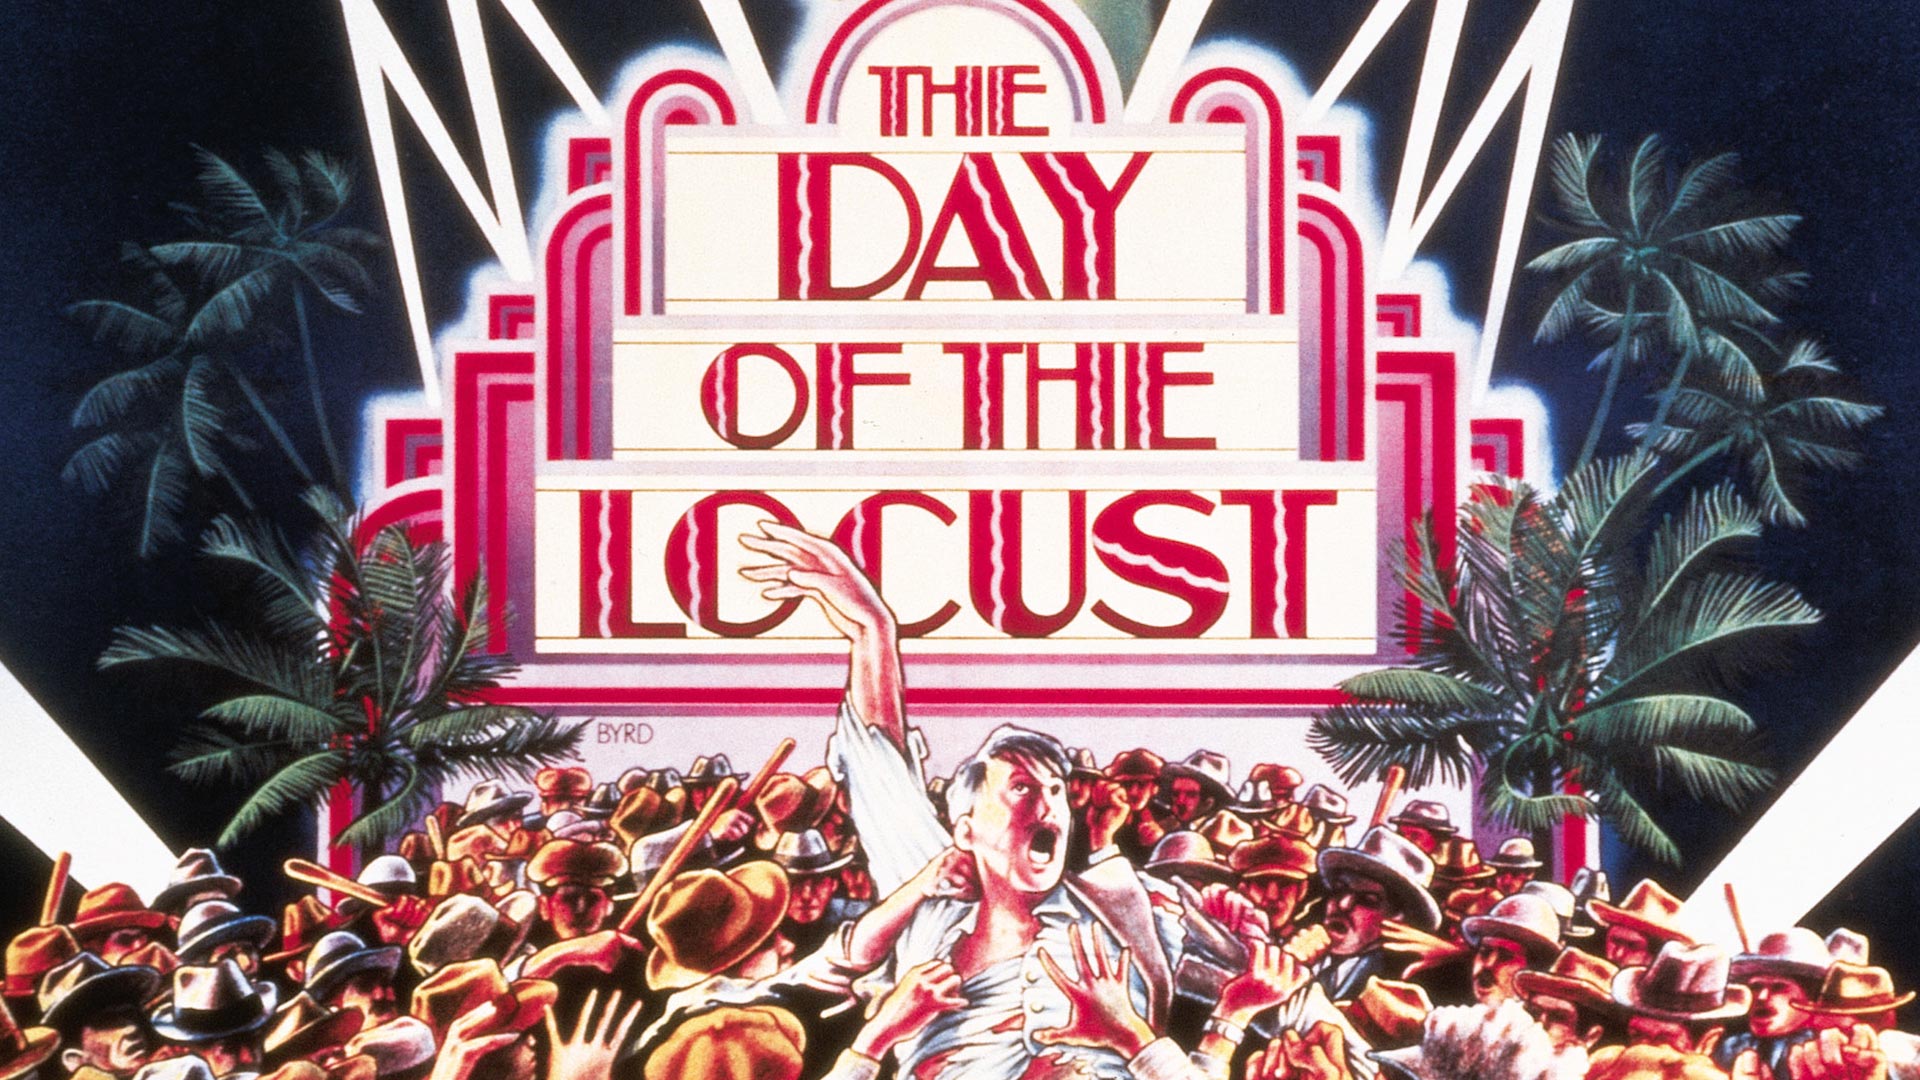 The Day Of The Locust